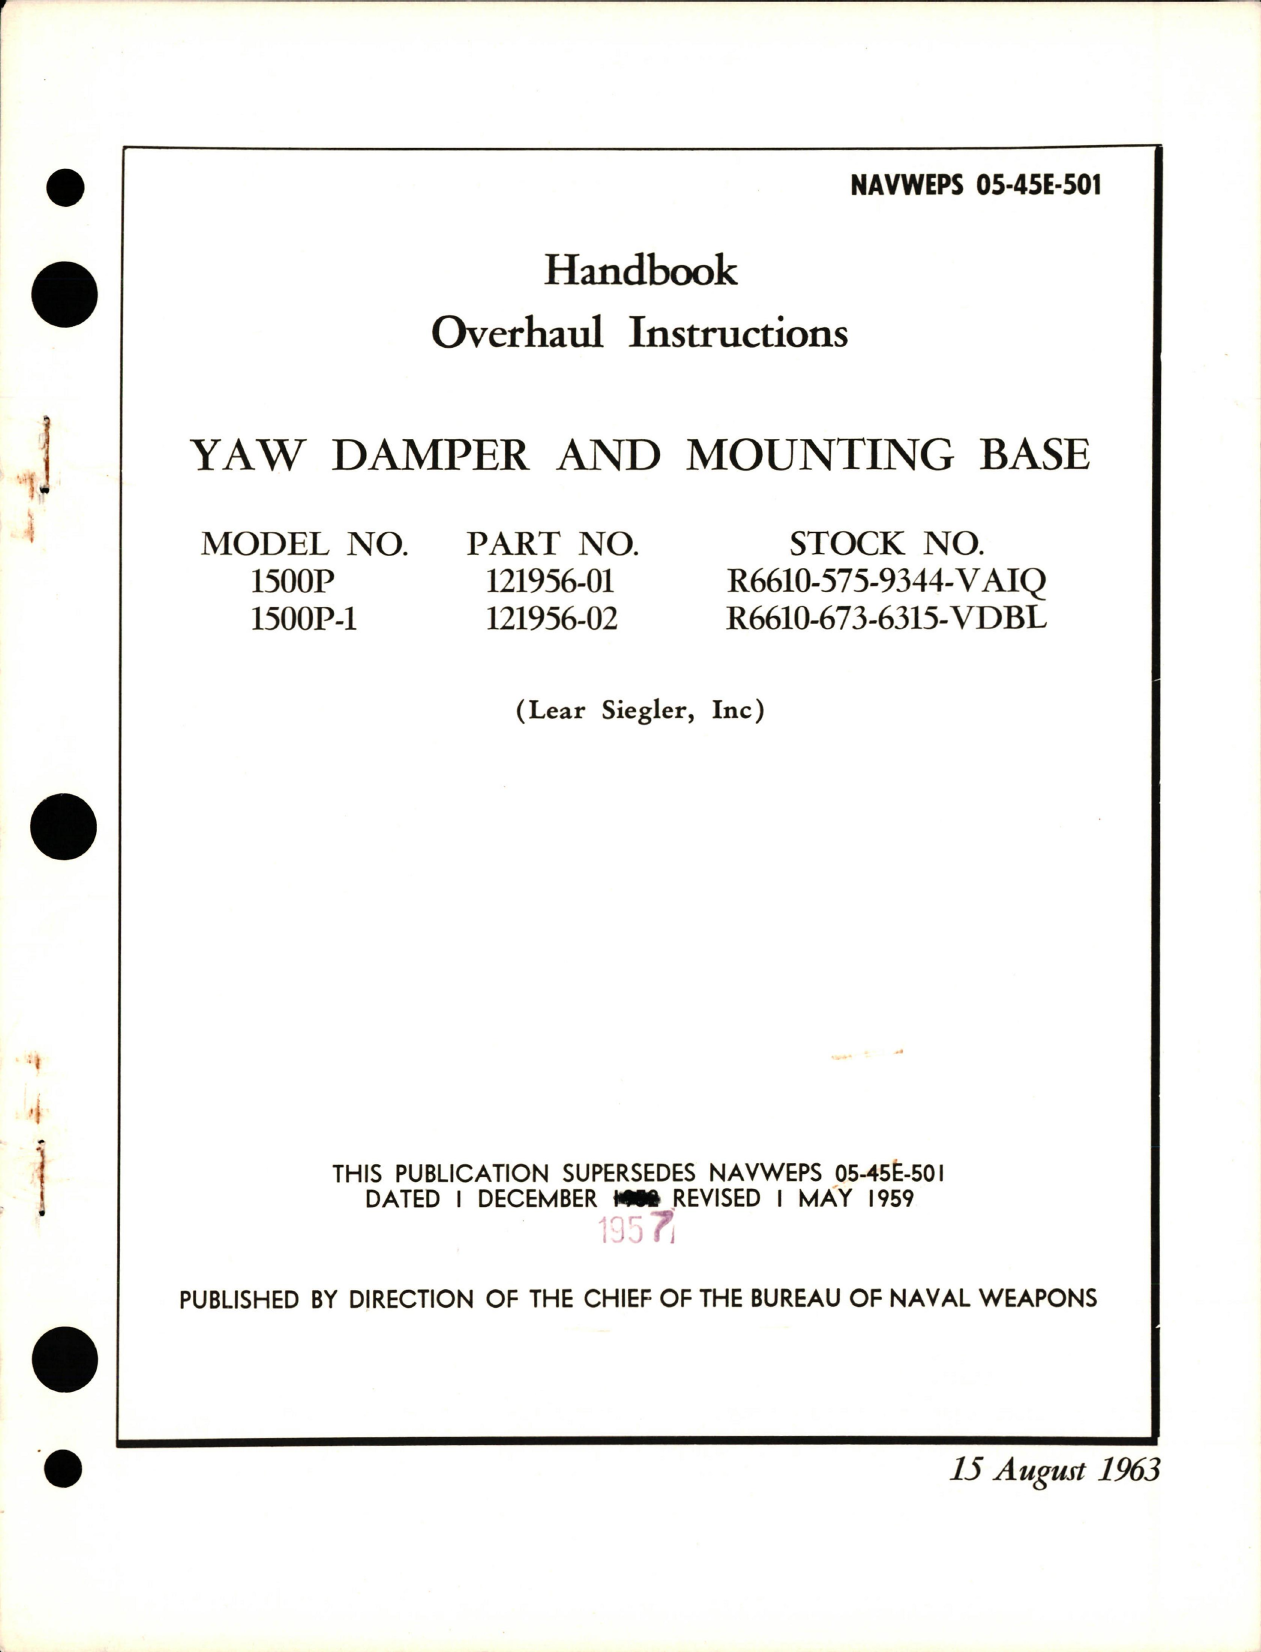 Sample page 1 from AirCorps Library document: Overhaul Instructions for Yaw Damper and Mounting Base - Model 1500P and 1500P-1 - Parts 121956-01 and 121956-02